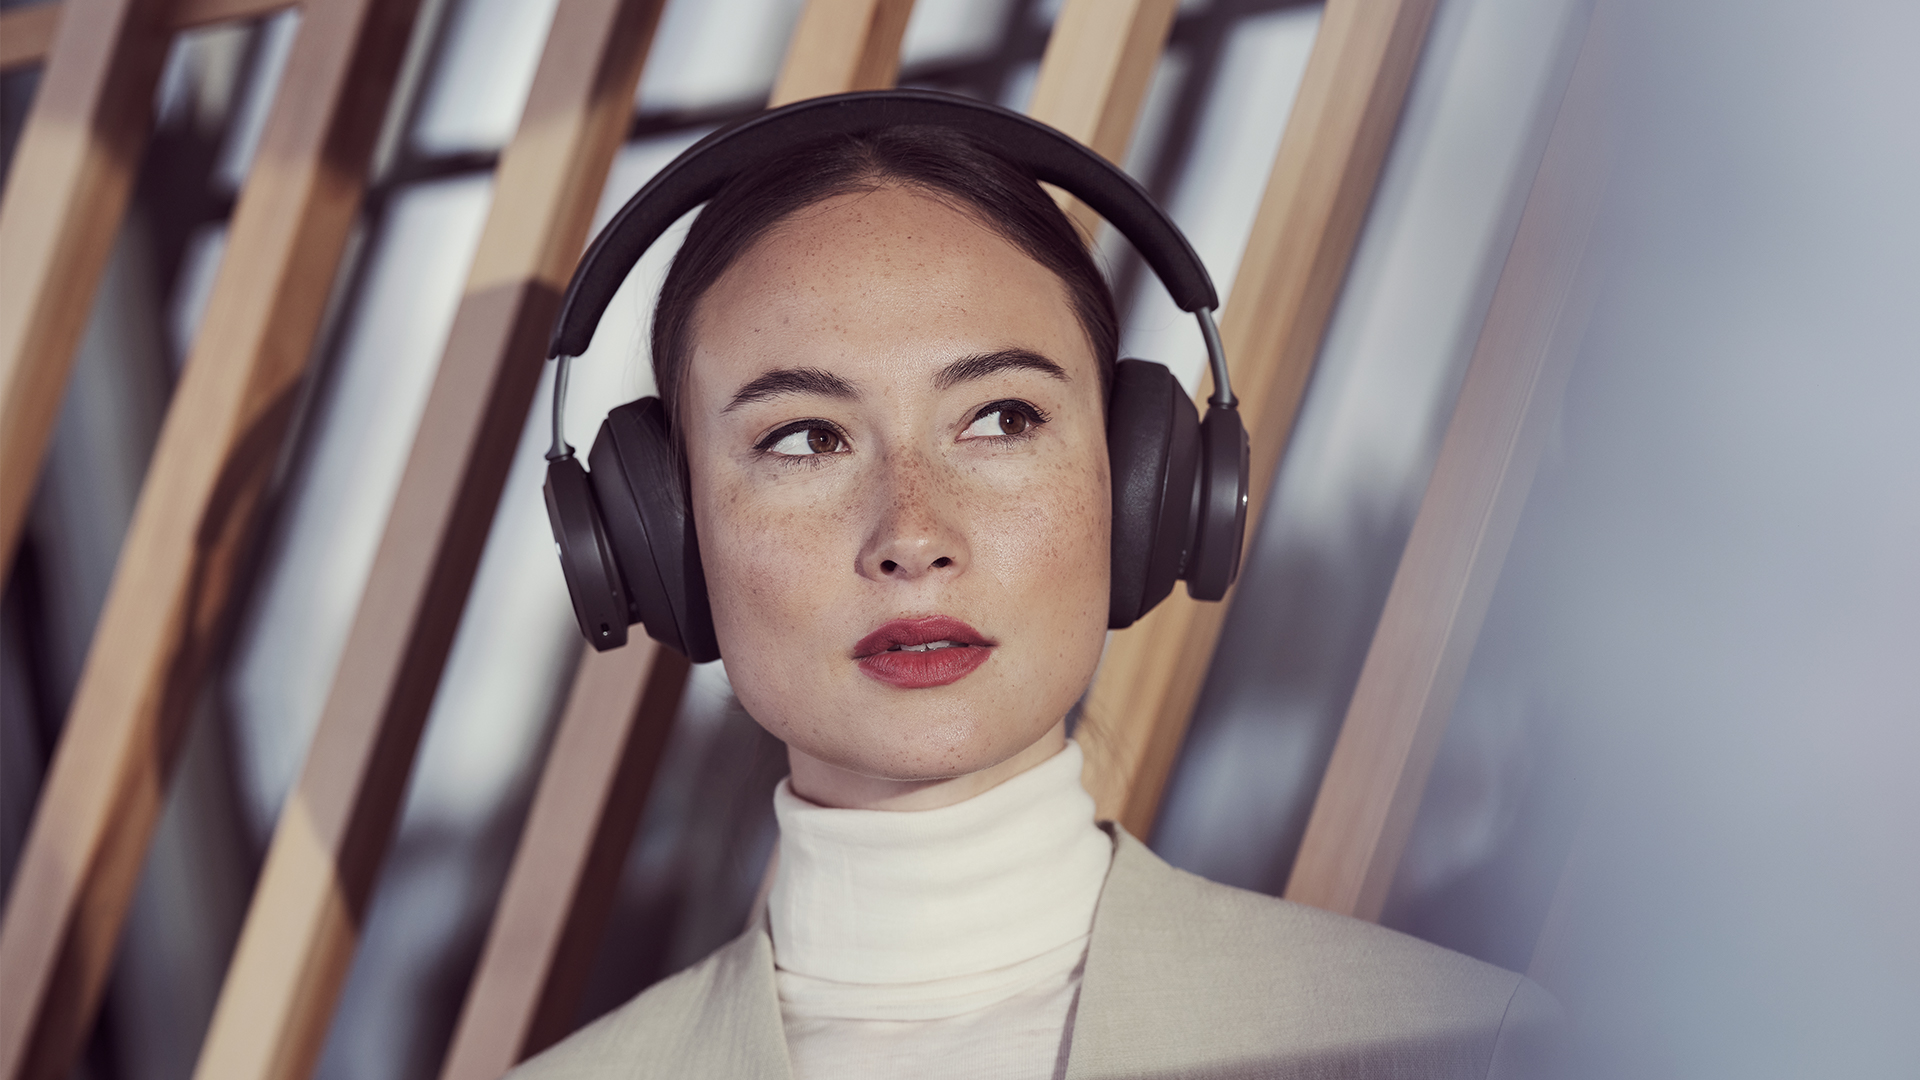 BANG & OLUFSEN INTRODUCES NEW EDITION OF BEOPLAY PORTAL